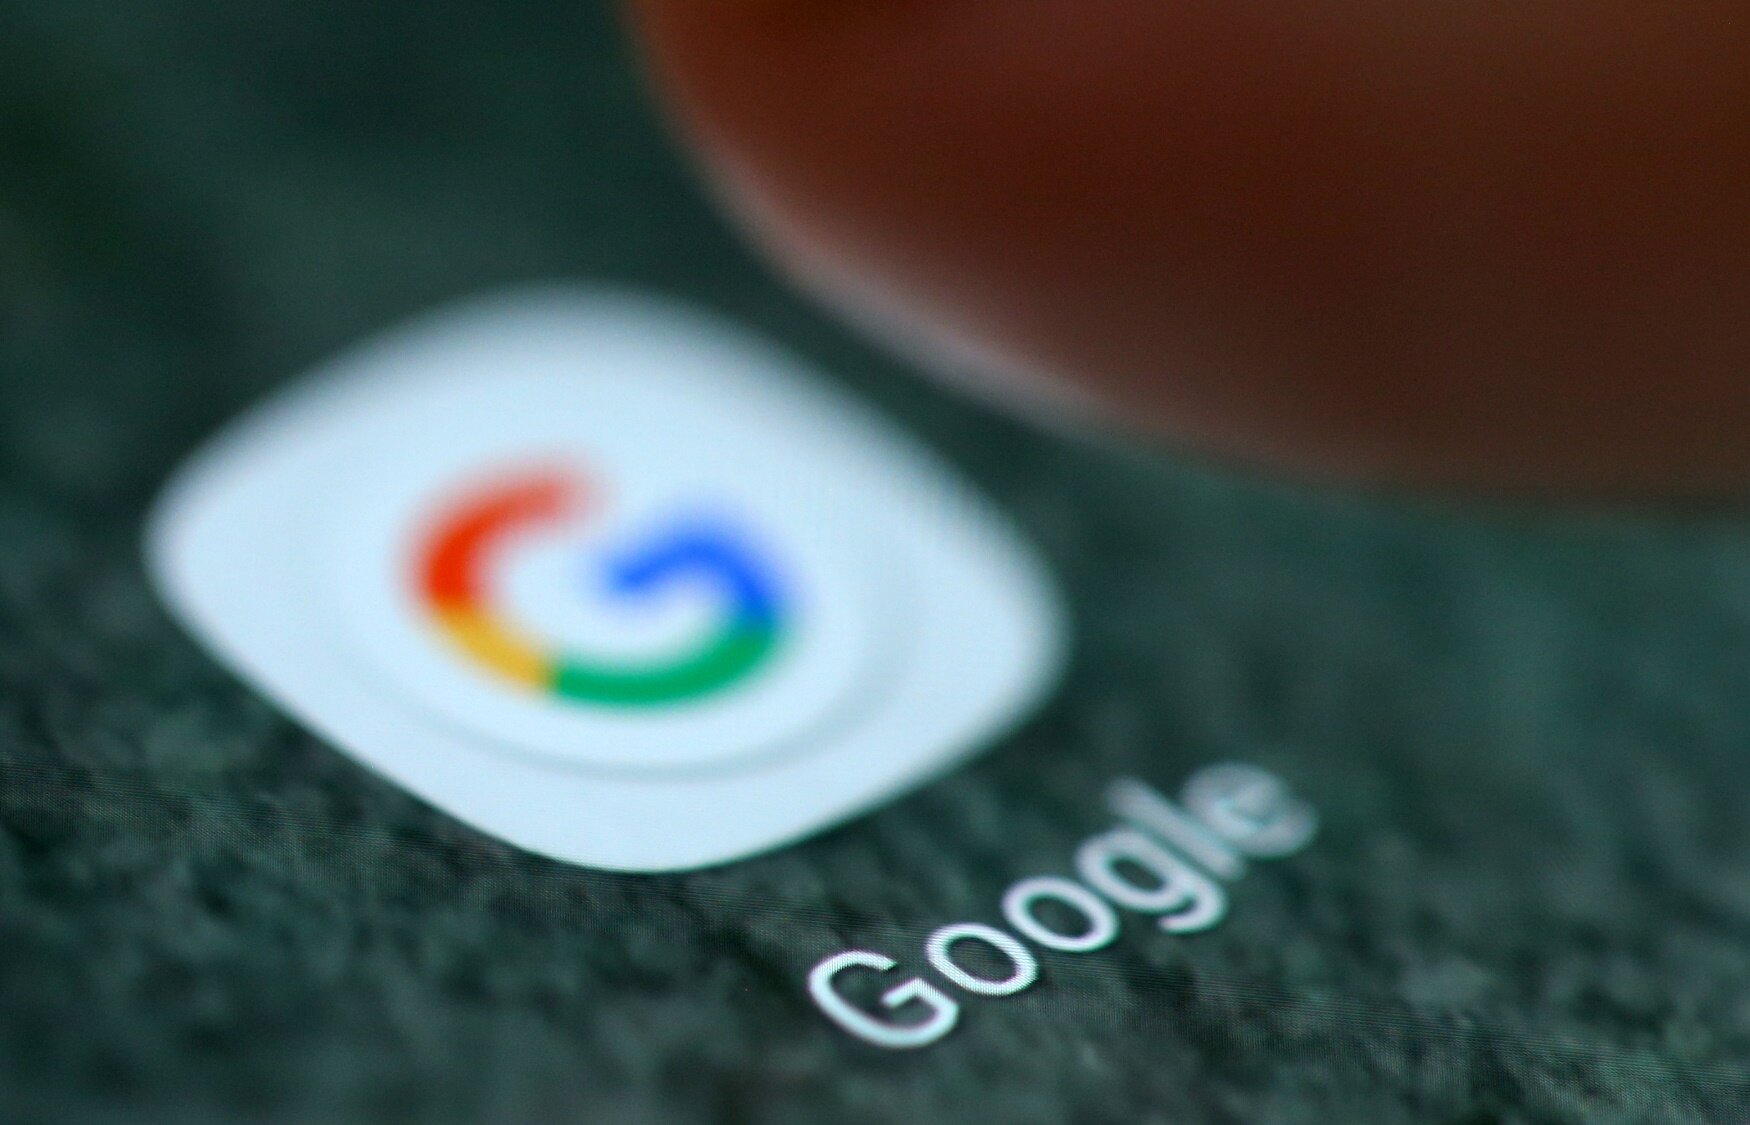 Google sued for collecting personal data in incognito mode